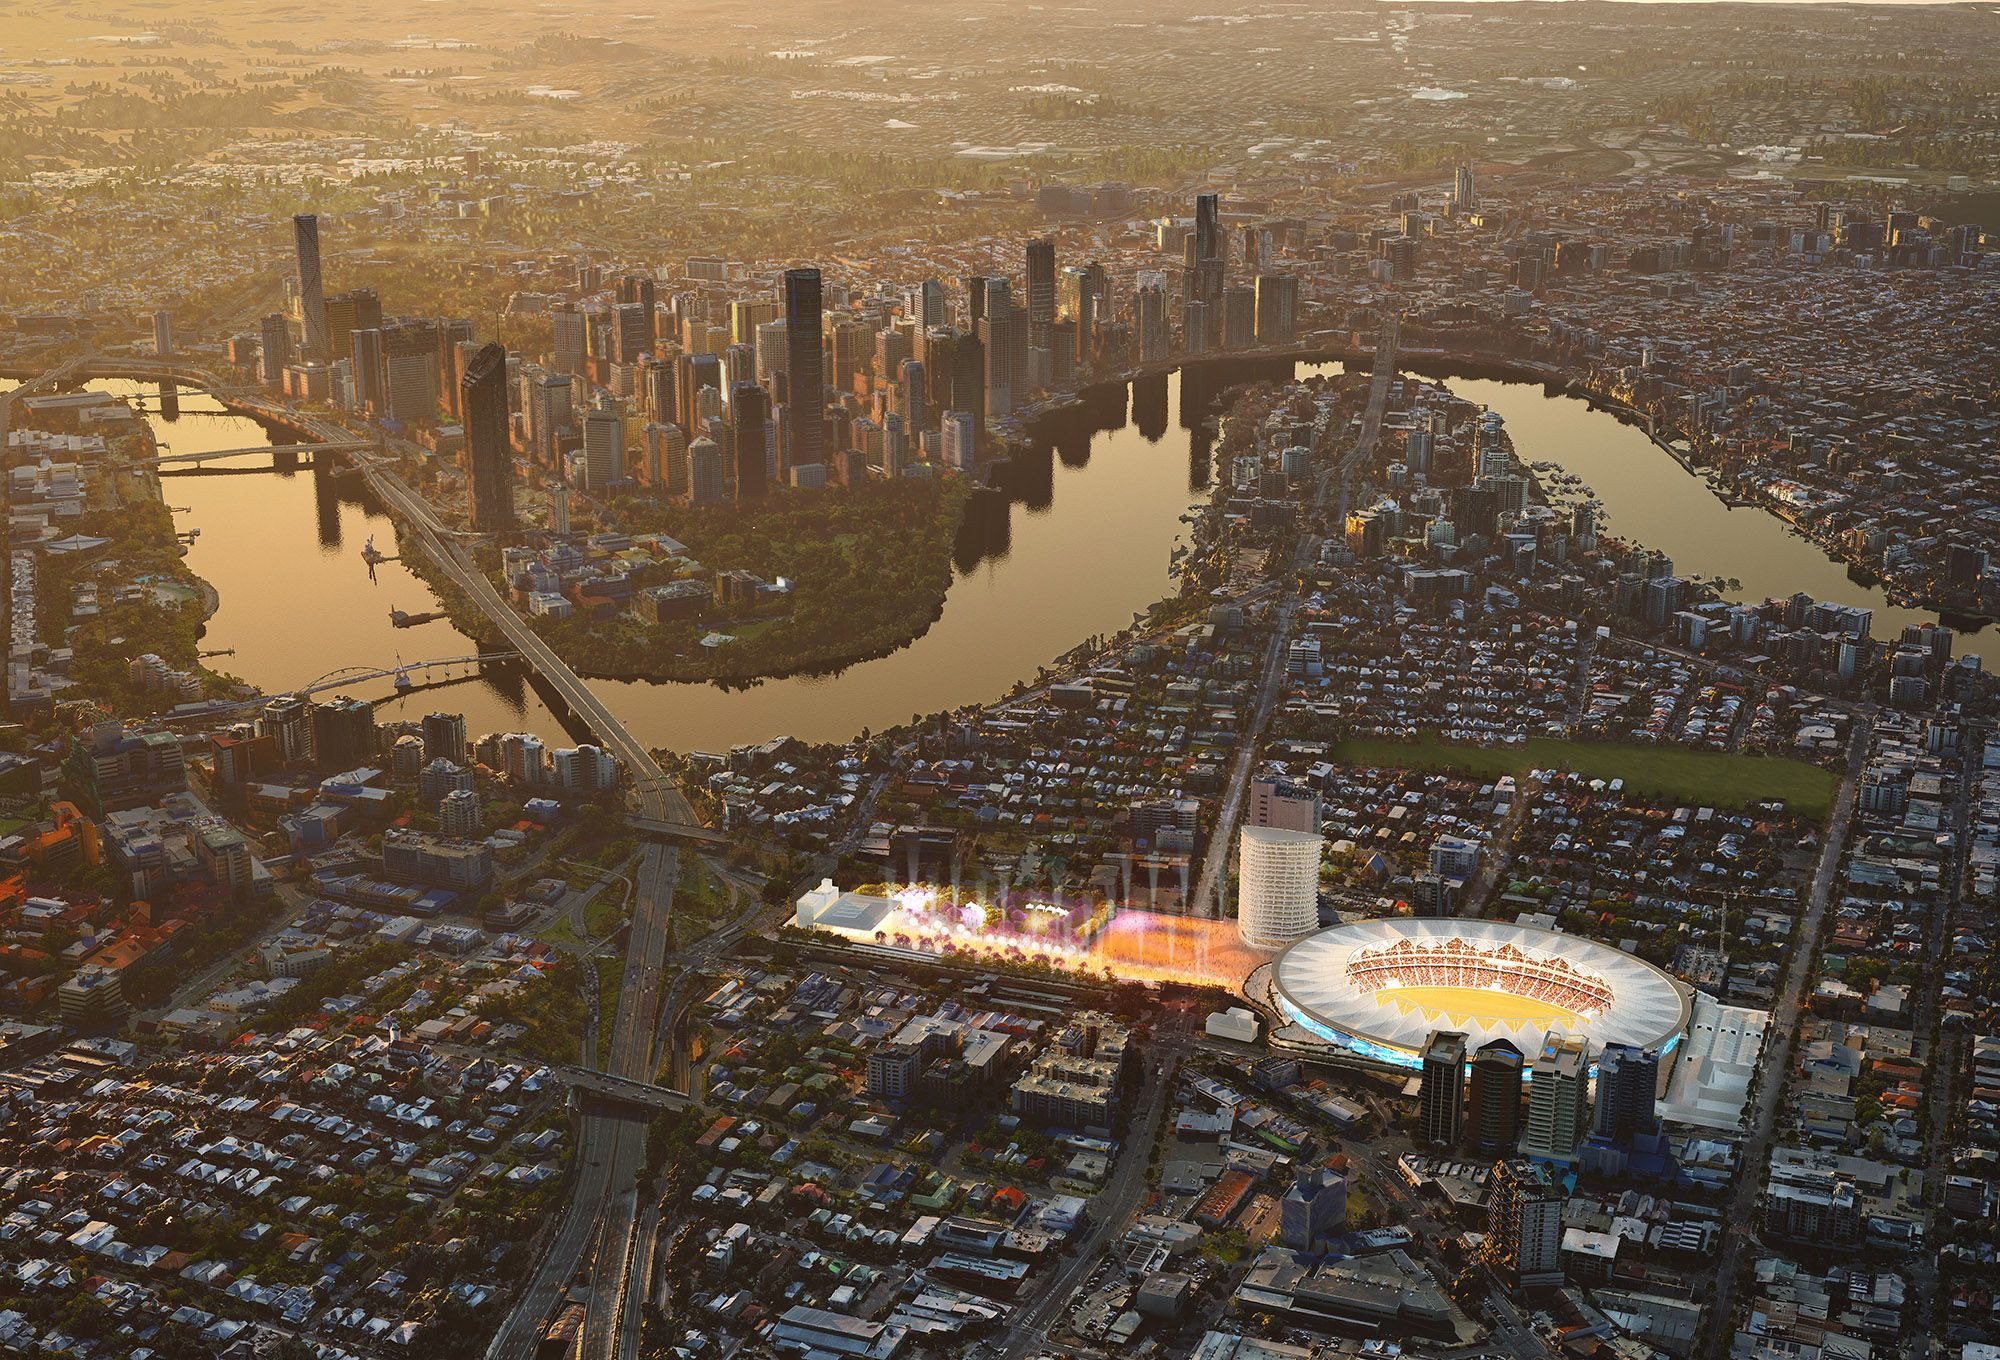 A Queensland-funded AUD 7 billion redevelopment of the Gabba is among the plans agreed for Brisbane 2032 ©Queensland Government